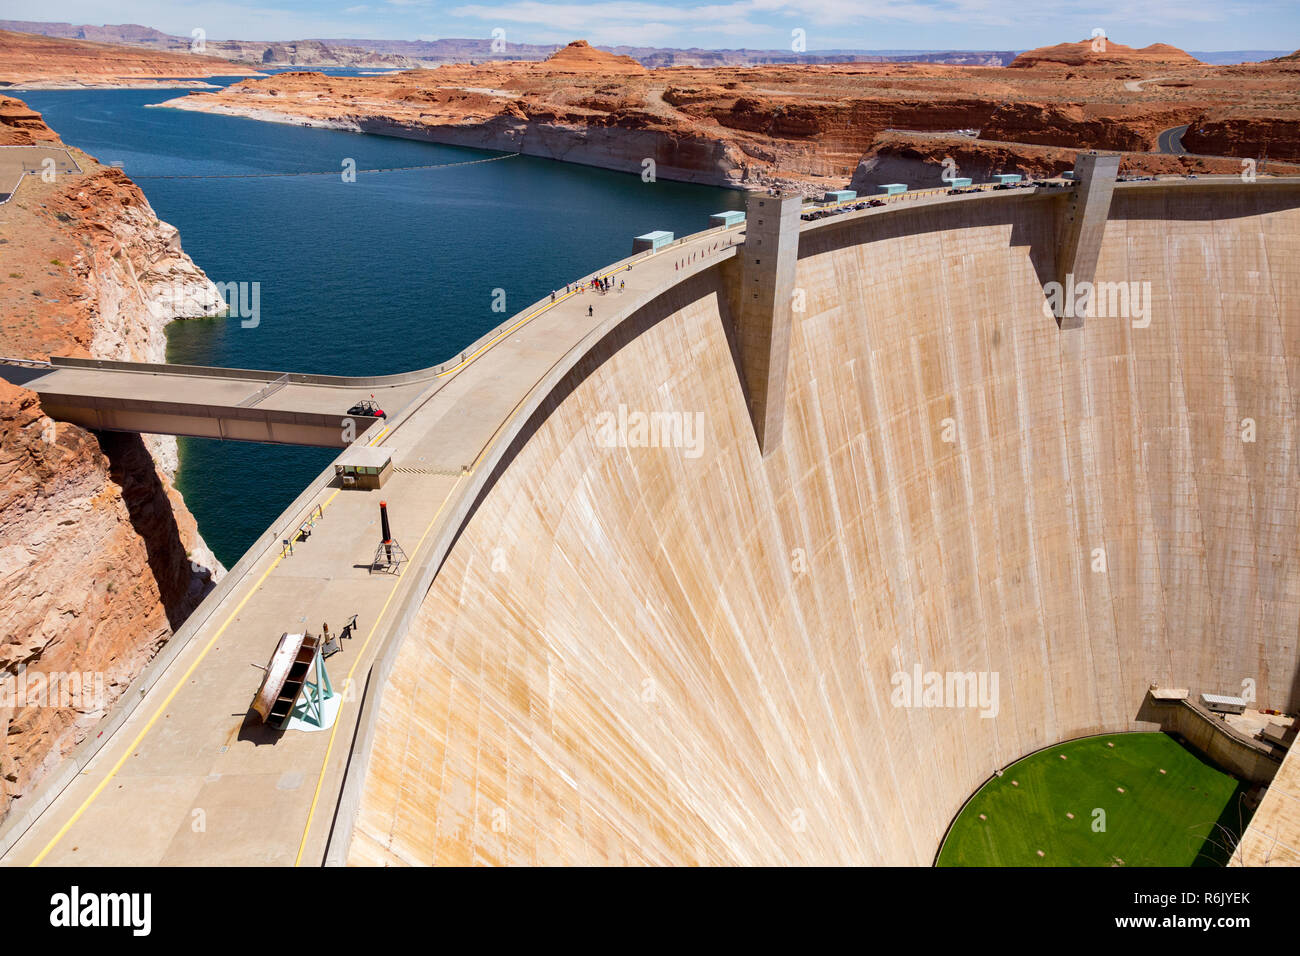 Glen Canyon Dam is a concrete arch-gravity dam on the Colorado River in northern Arizona, United States, near the town of Page. The 710-foot high dam Stock Photo